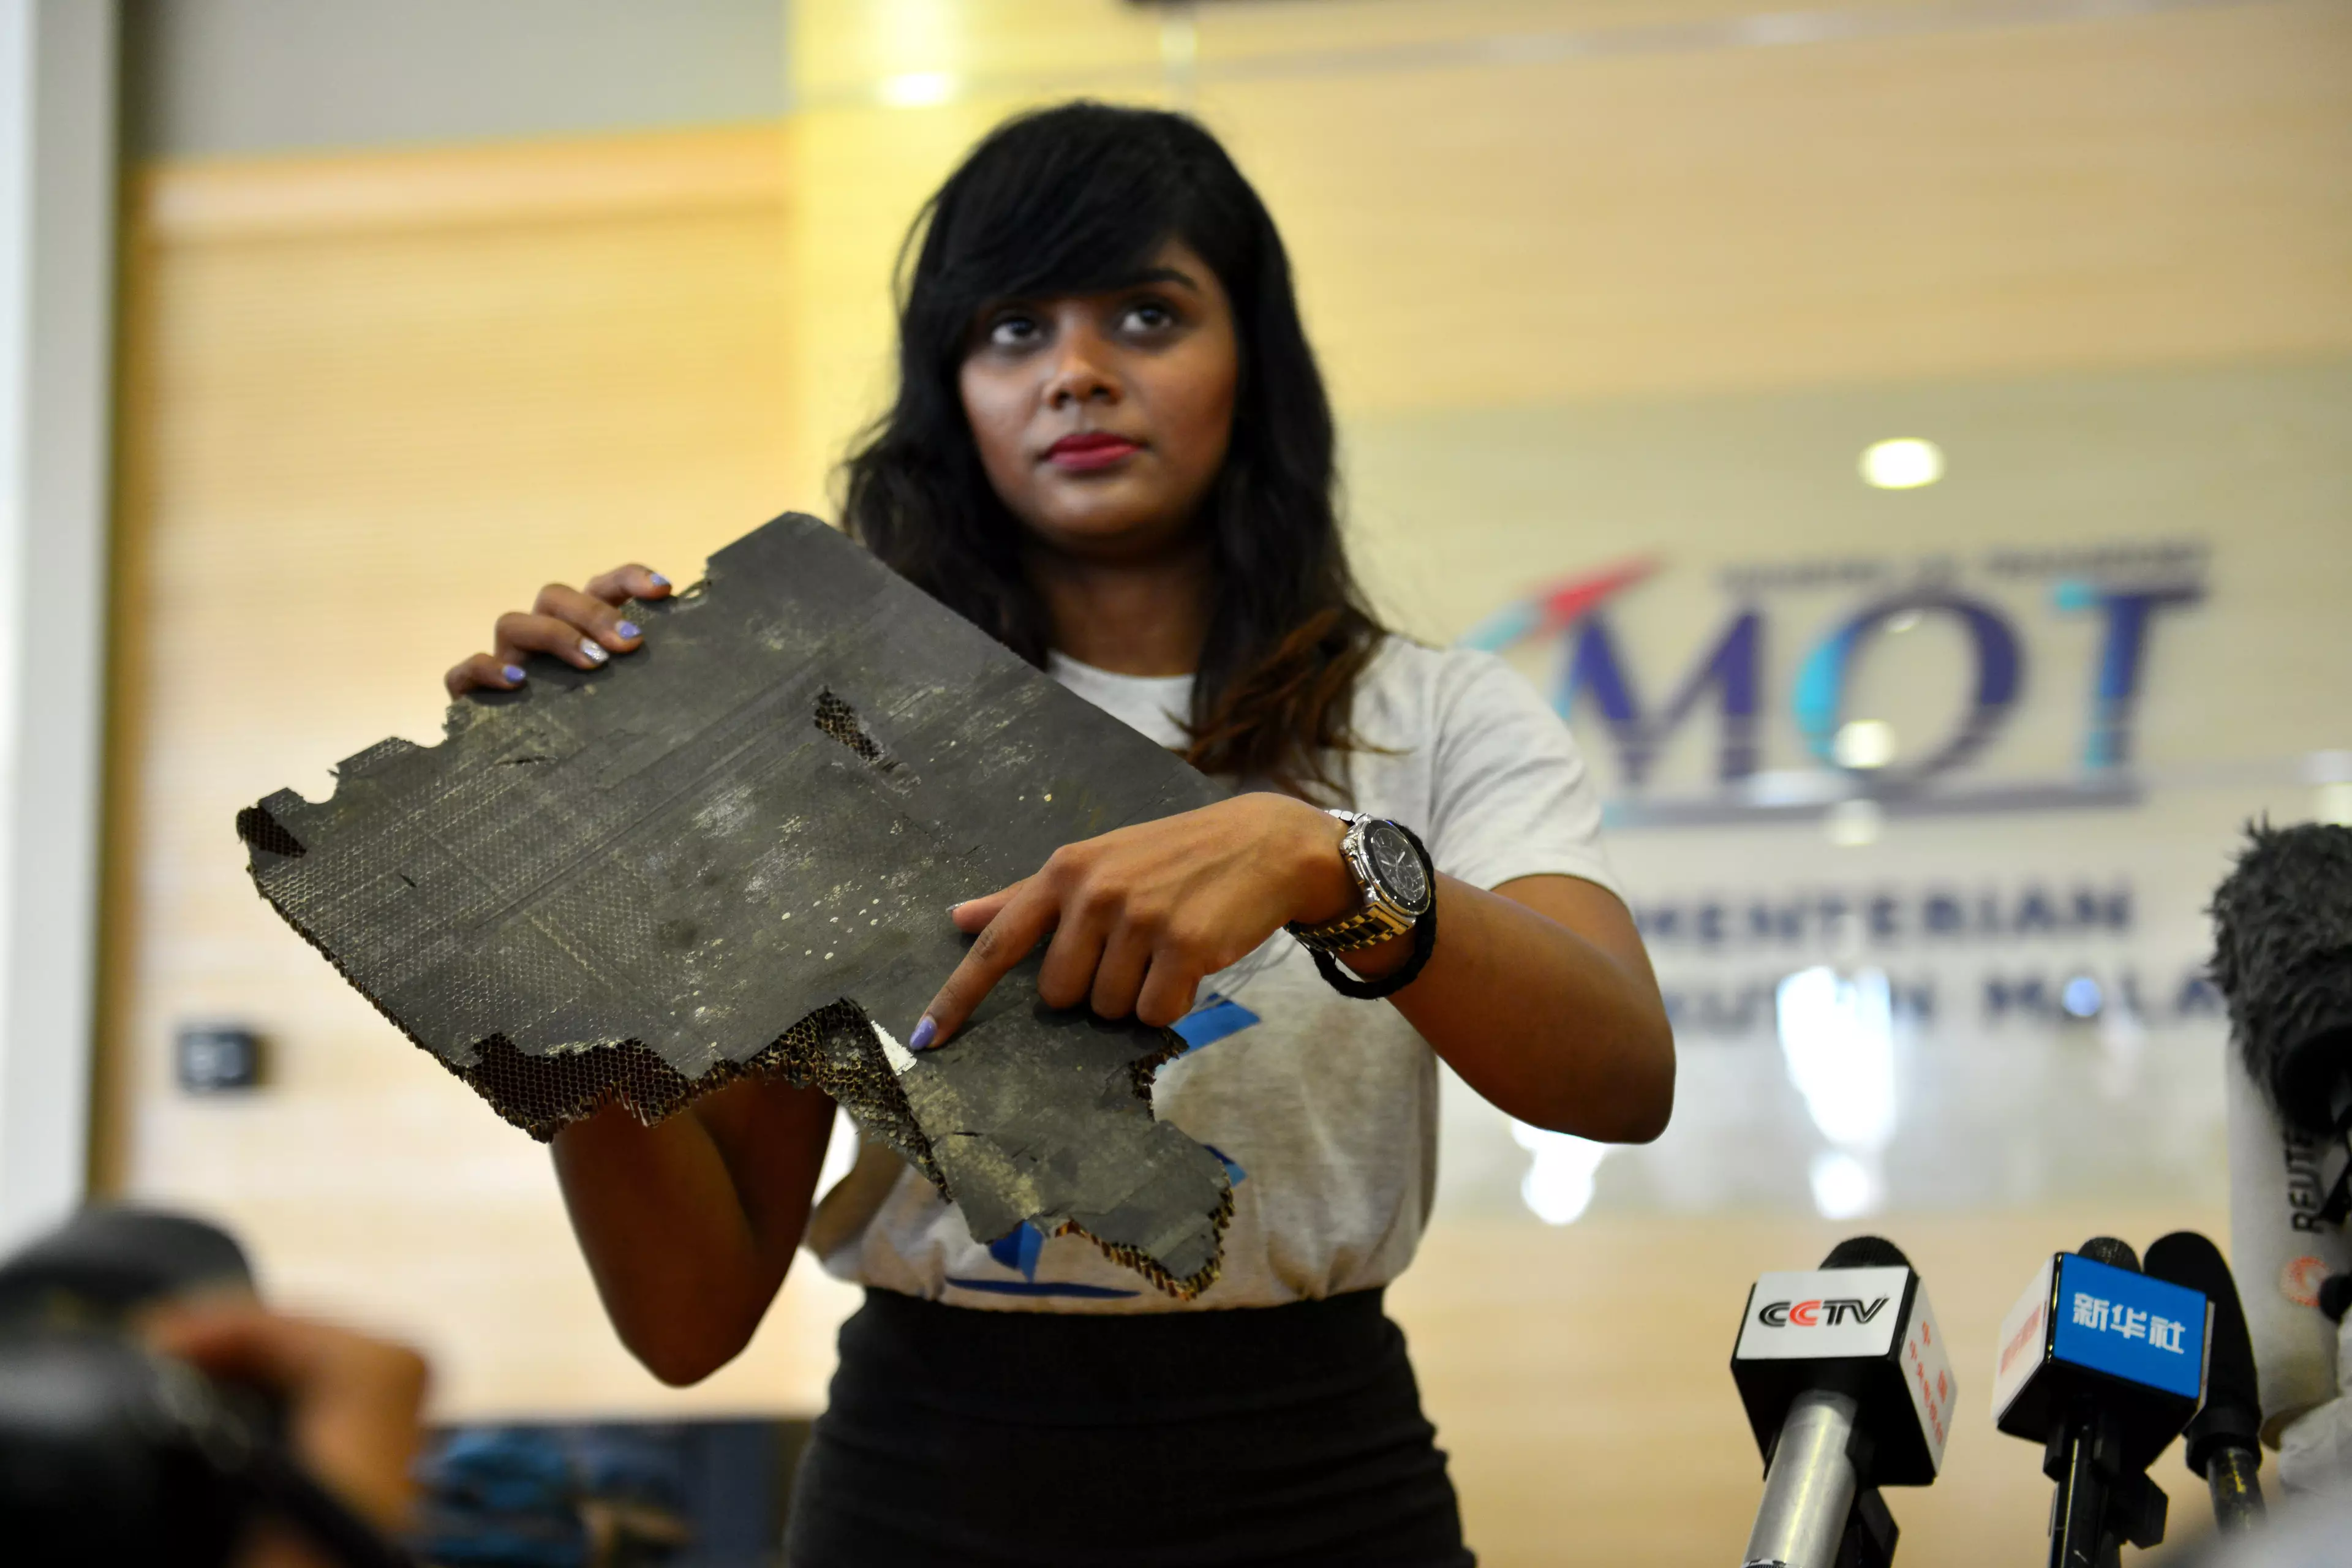 Debris believed to be from the plane was found in the Indian Ocean in 2017.